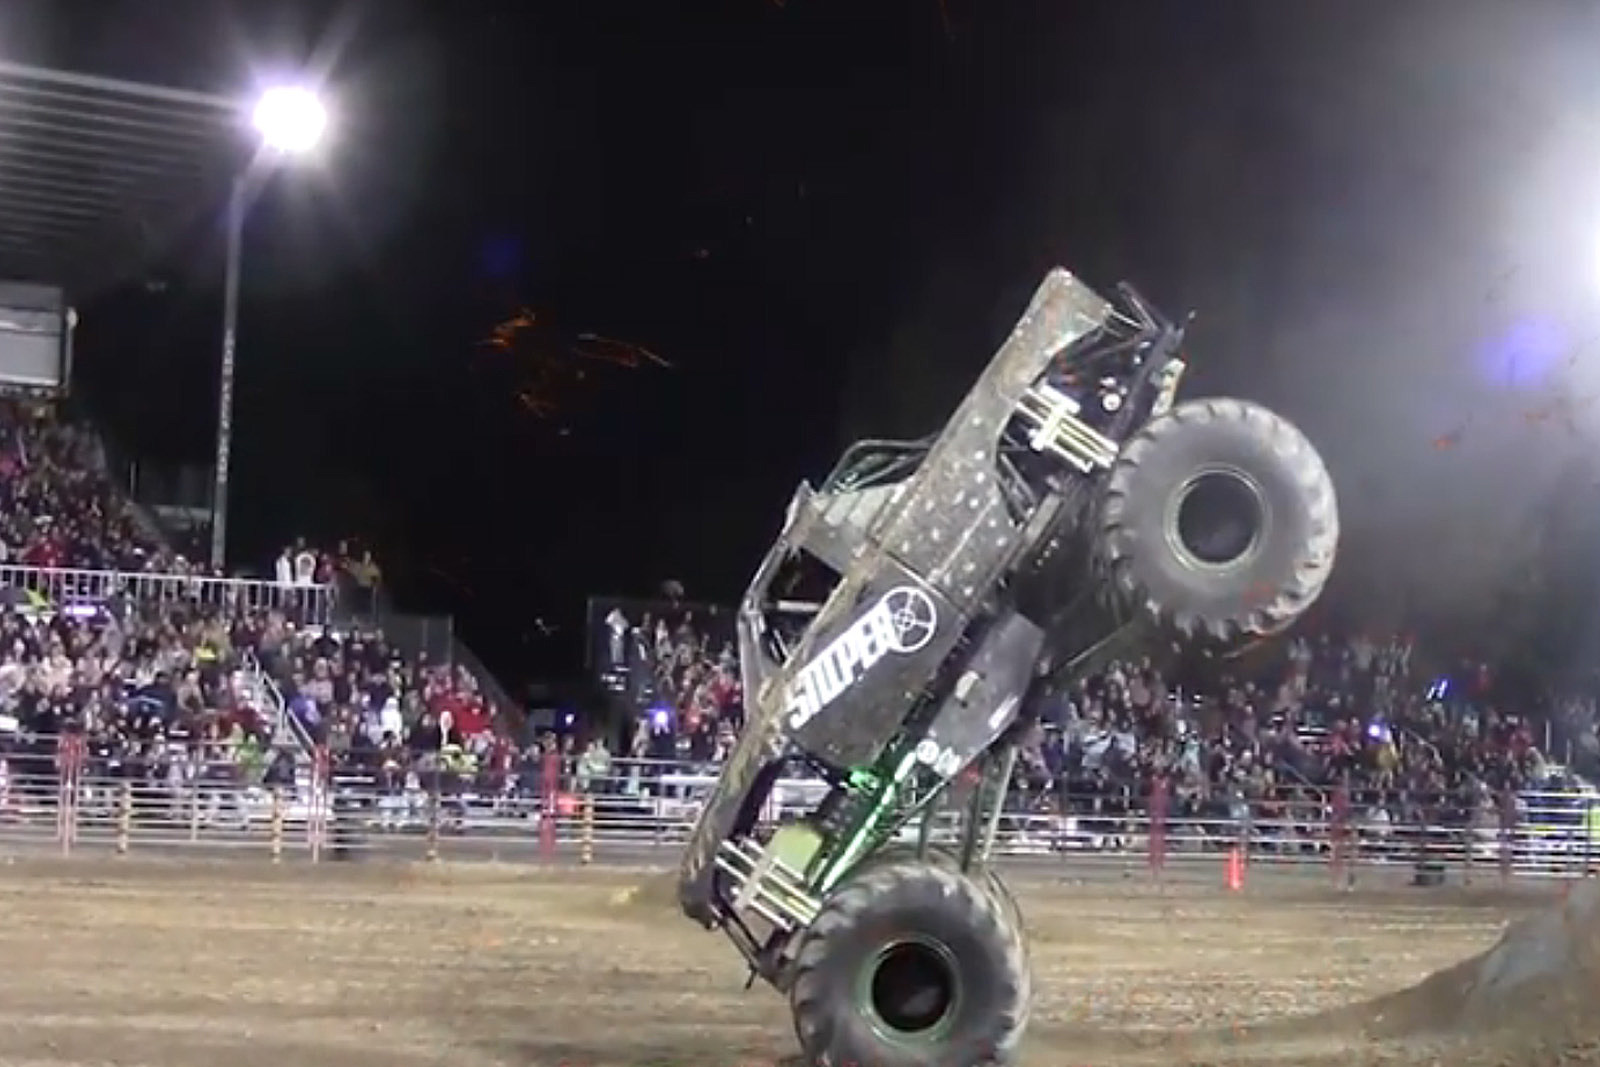 Monster Trucks, Human Cannonball And More Coming To Glenns Ferry